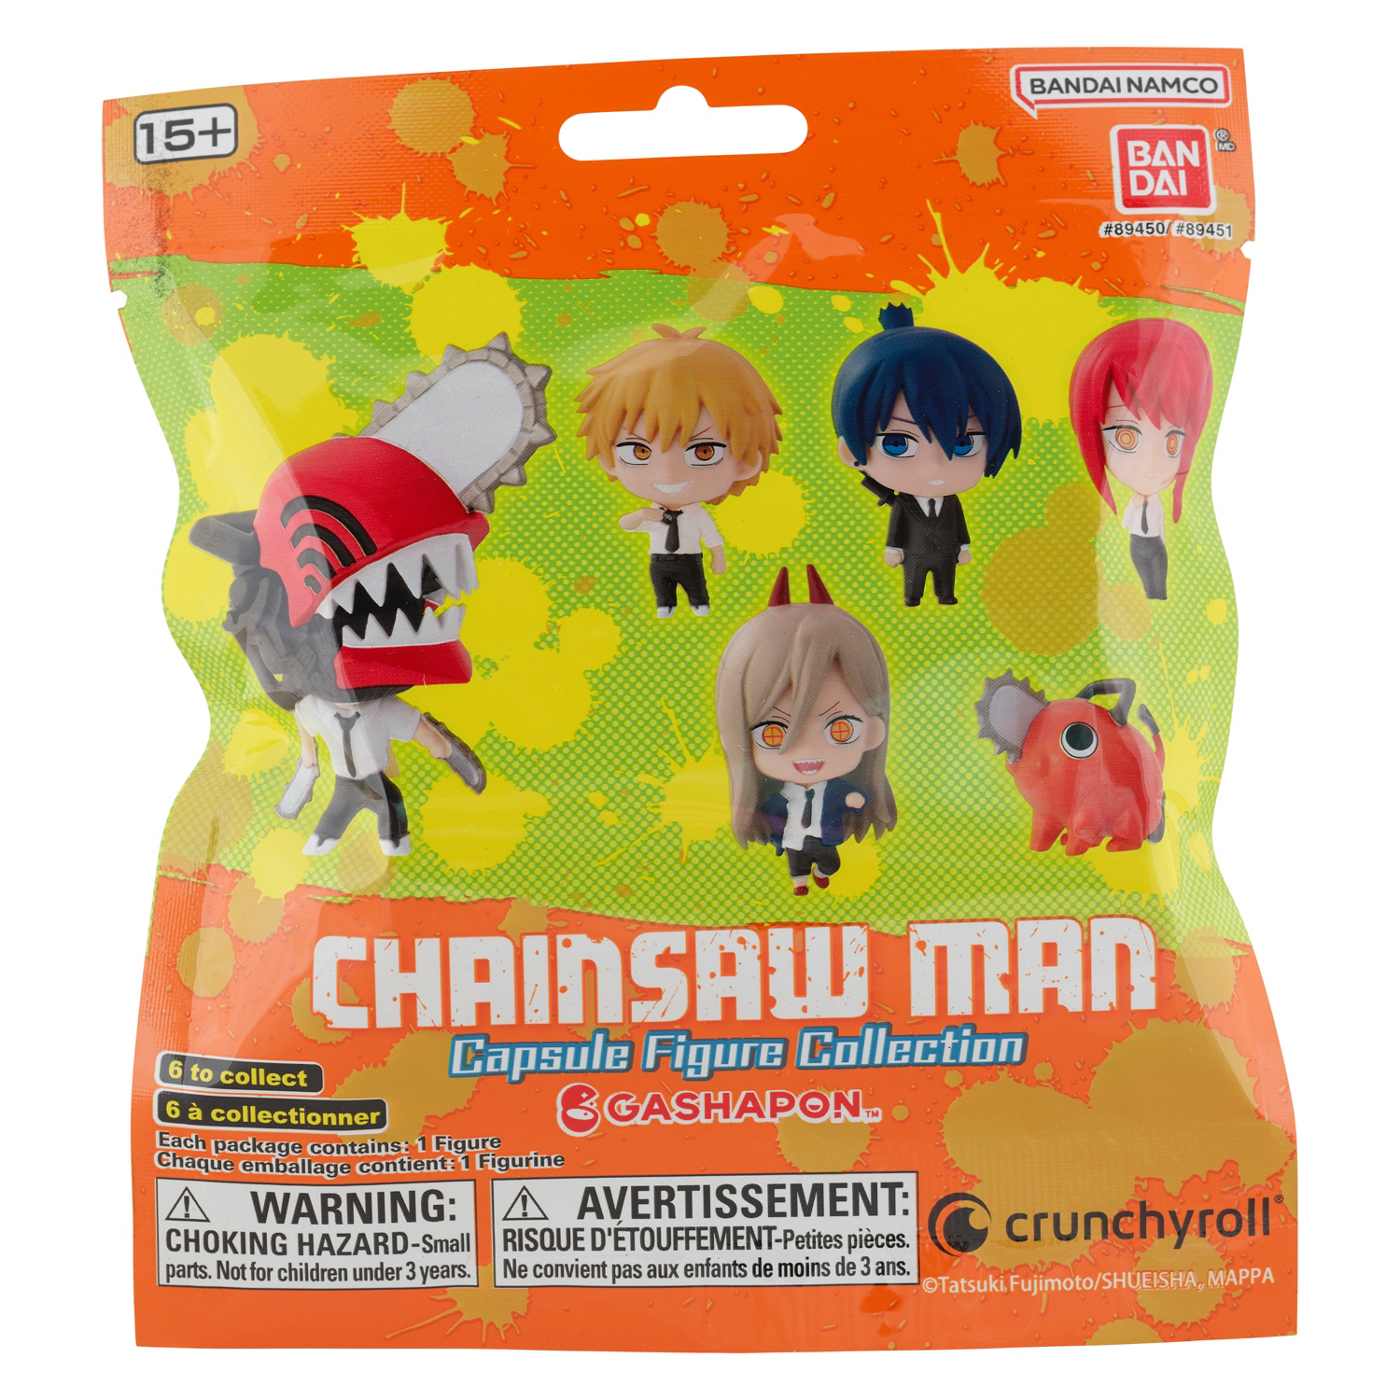 Bandai Chainsaw Man Capsule Figure Collection; image 1 of 7